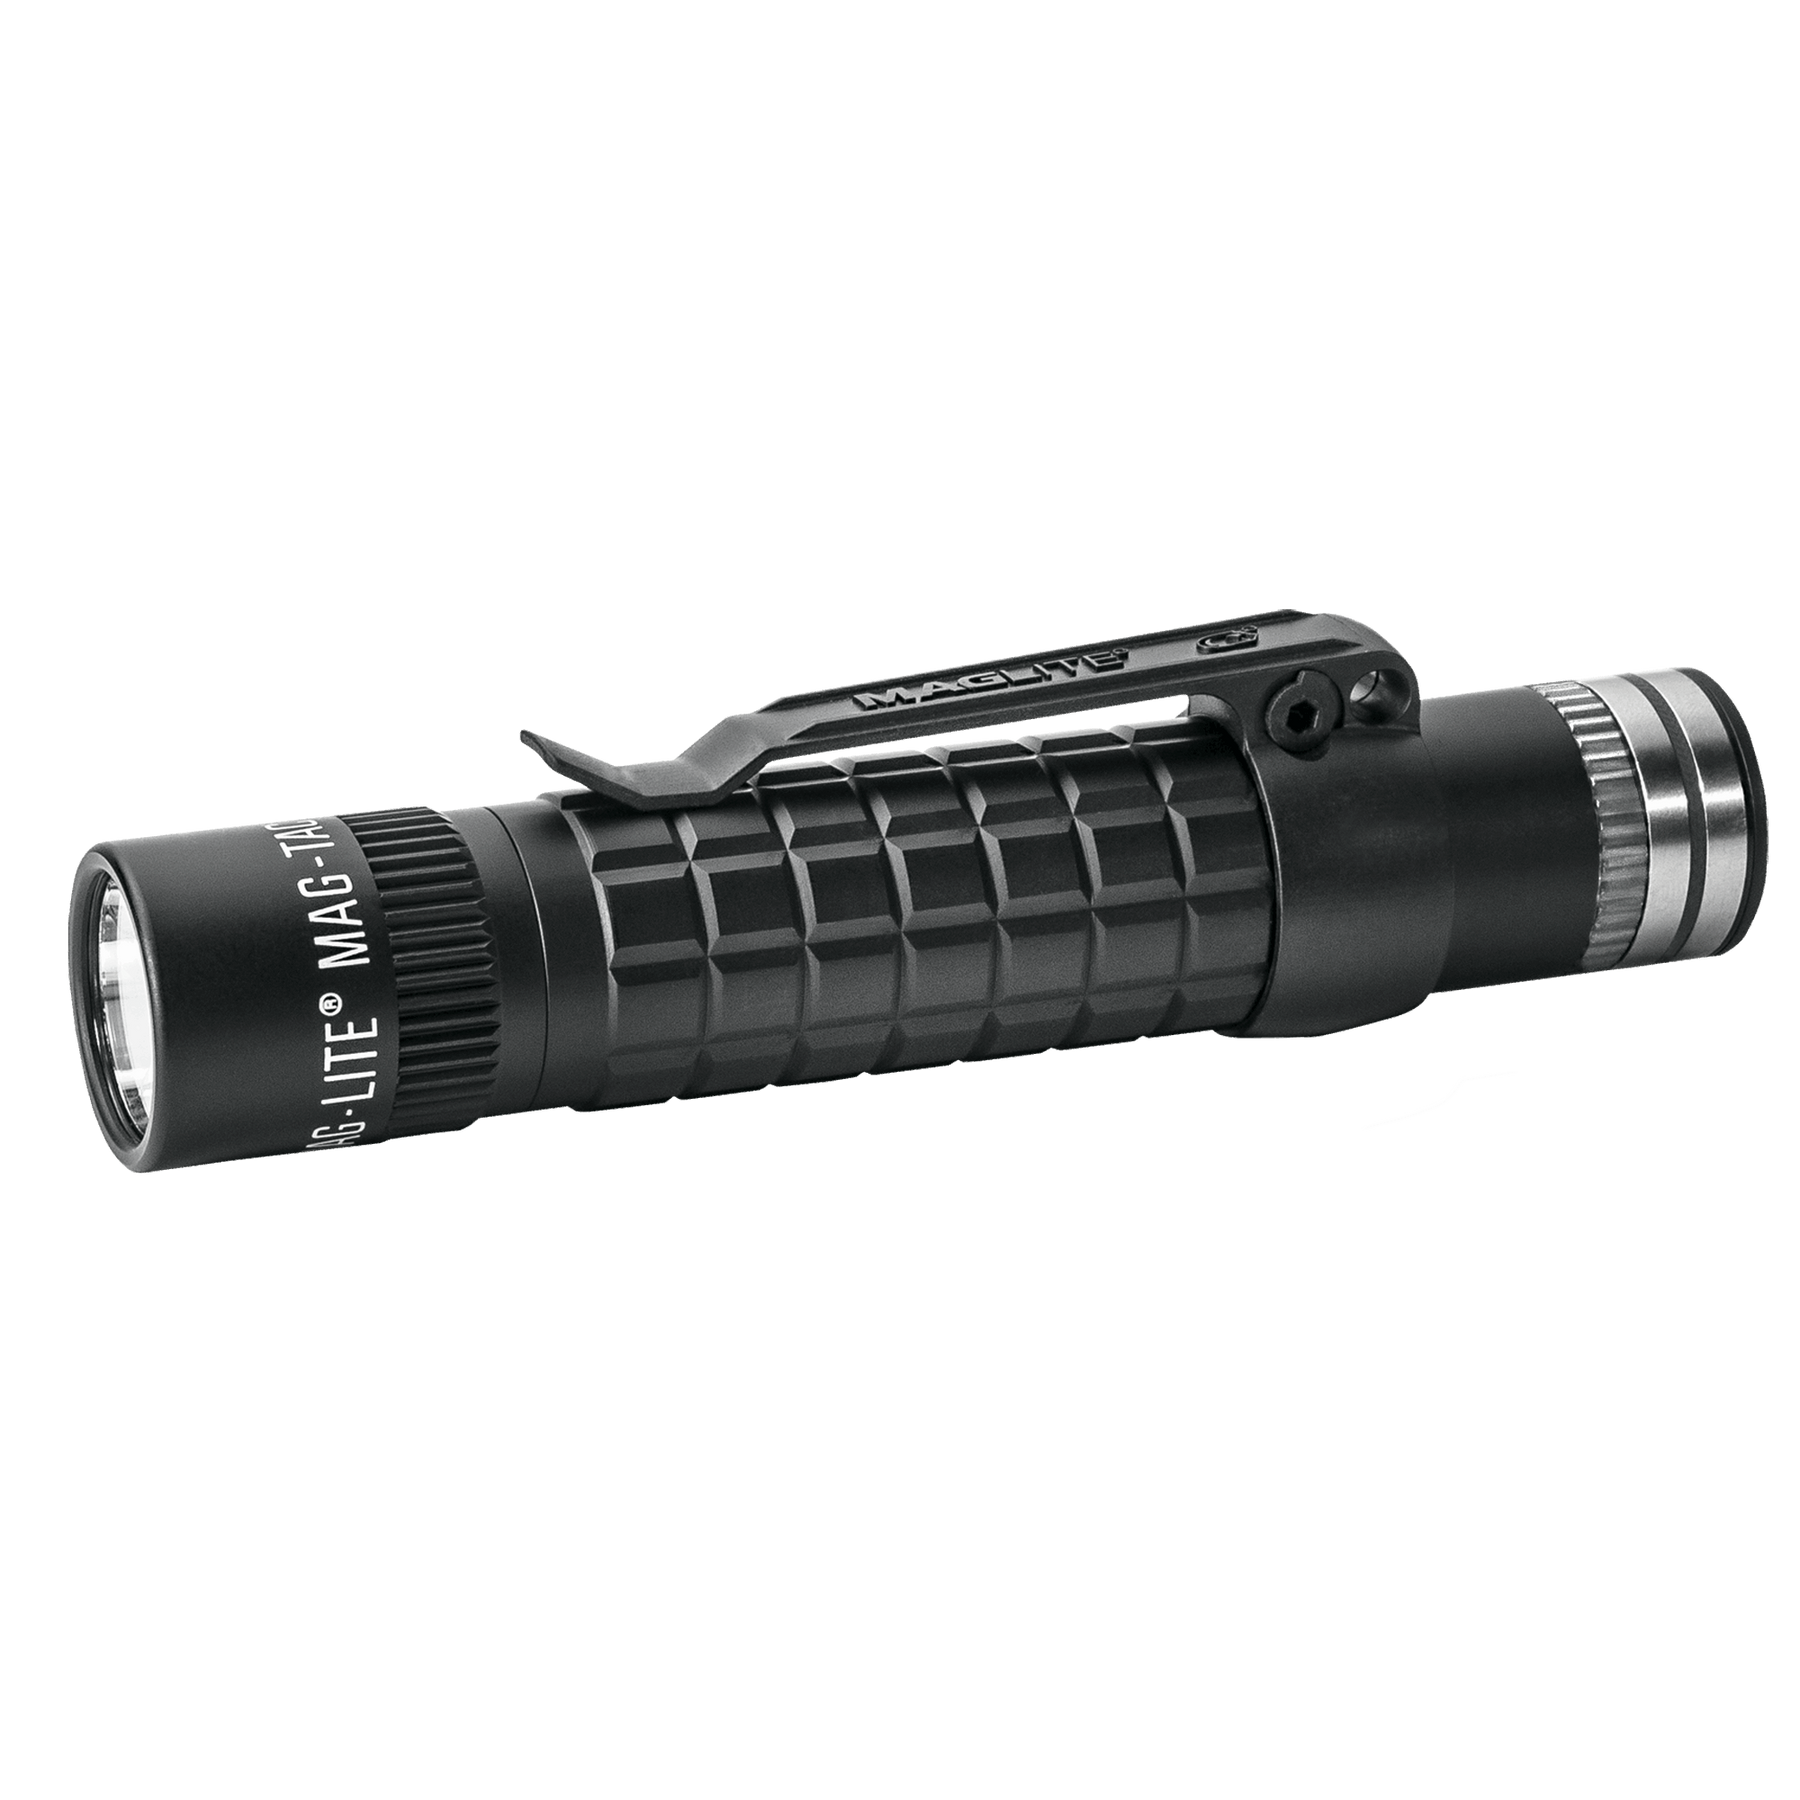 Maglite MagTac Led rechargeable